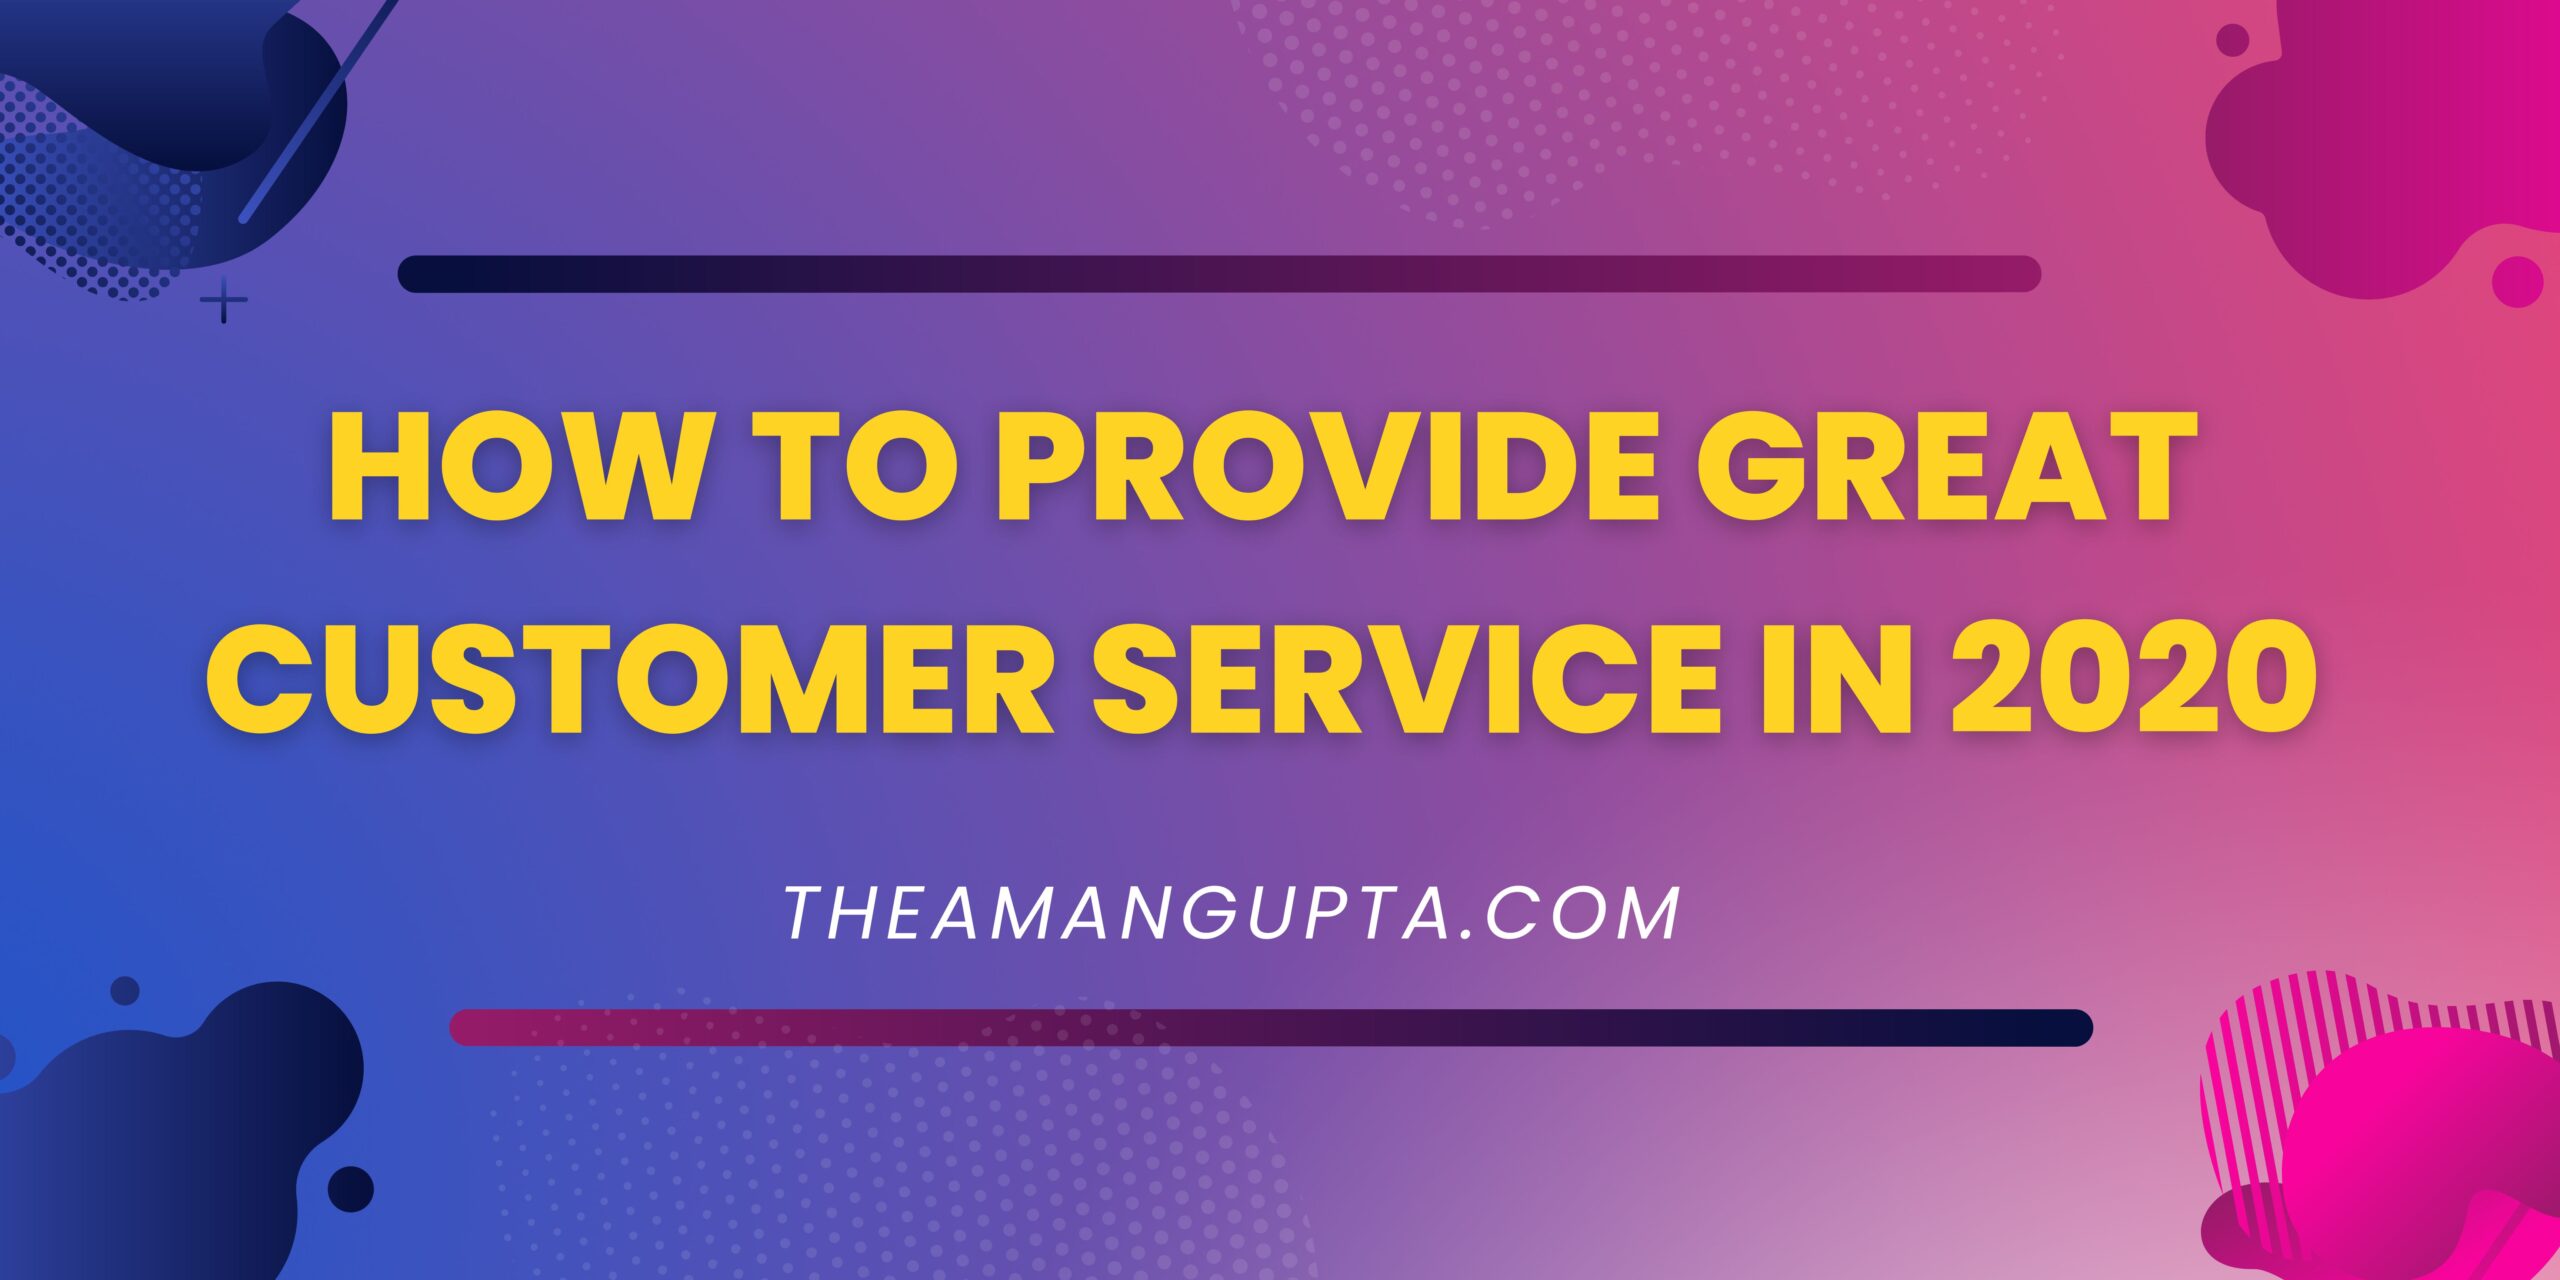 How To Provide Great Customer Service In 2020|Customer Service|Theamangupta|Theamangupta